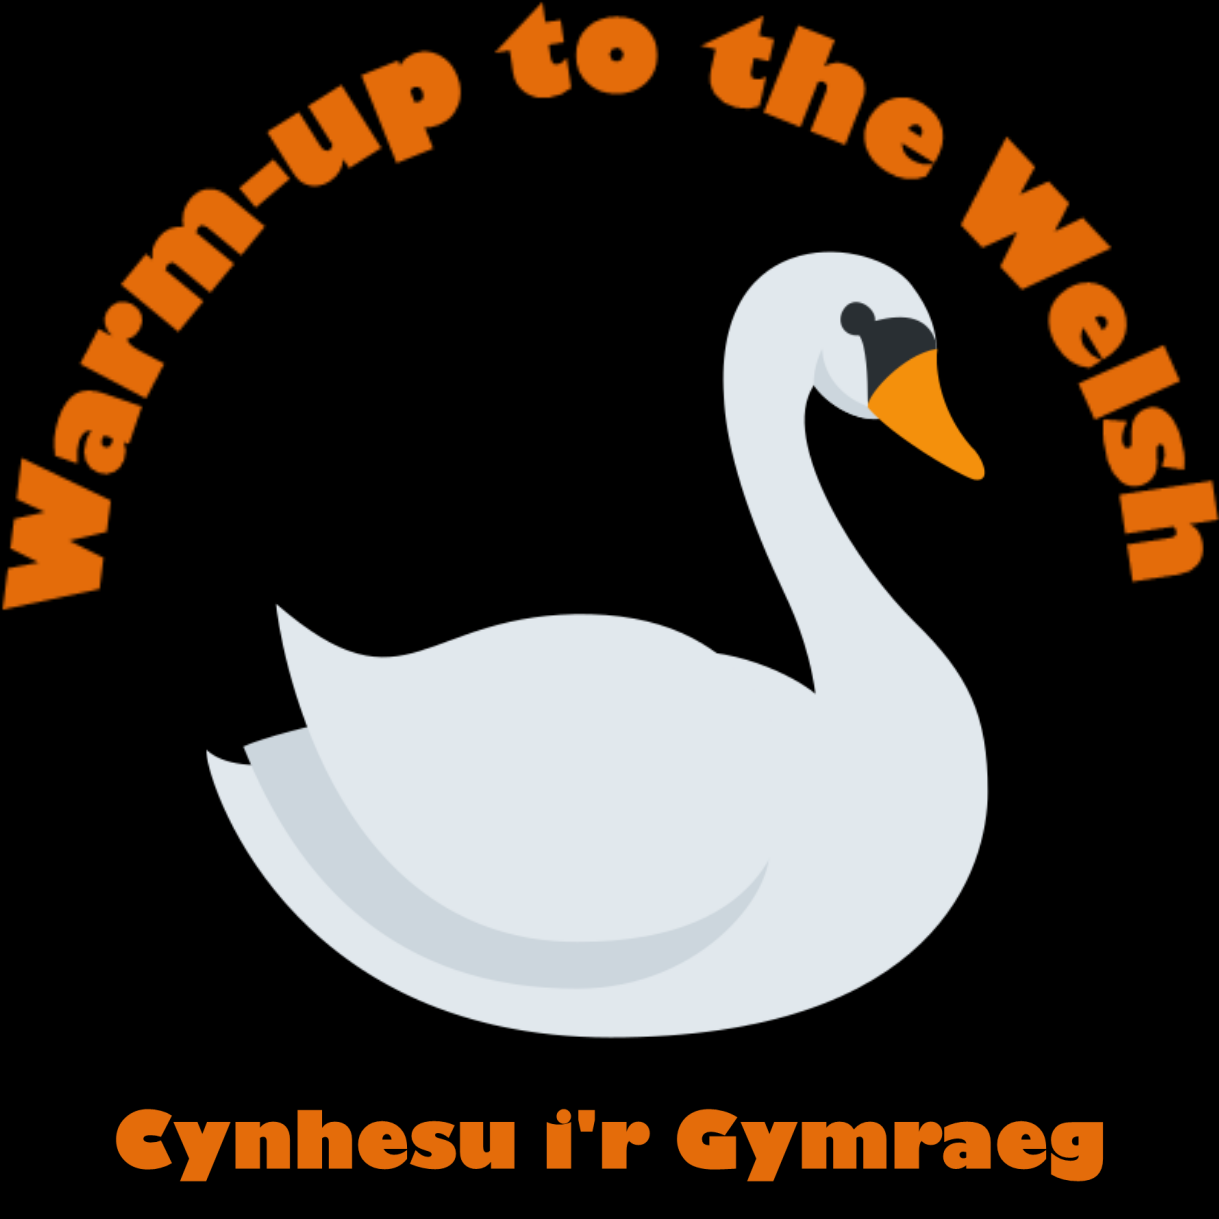 Warm-up to the Welsh - Swansea Steamroller